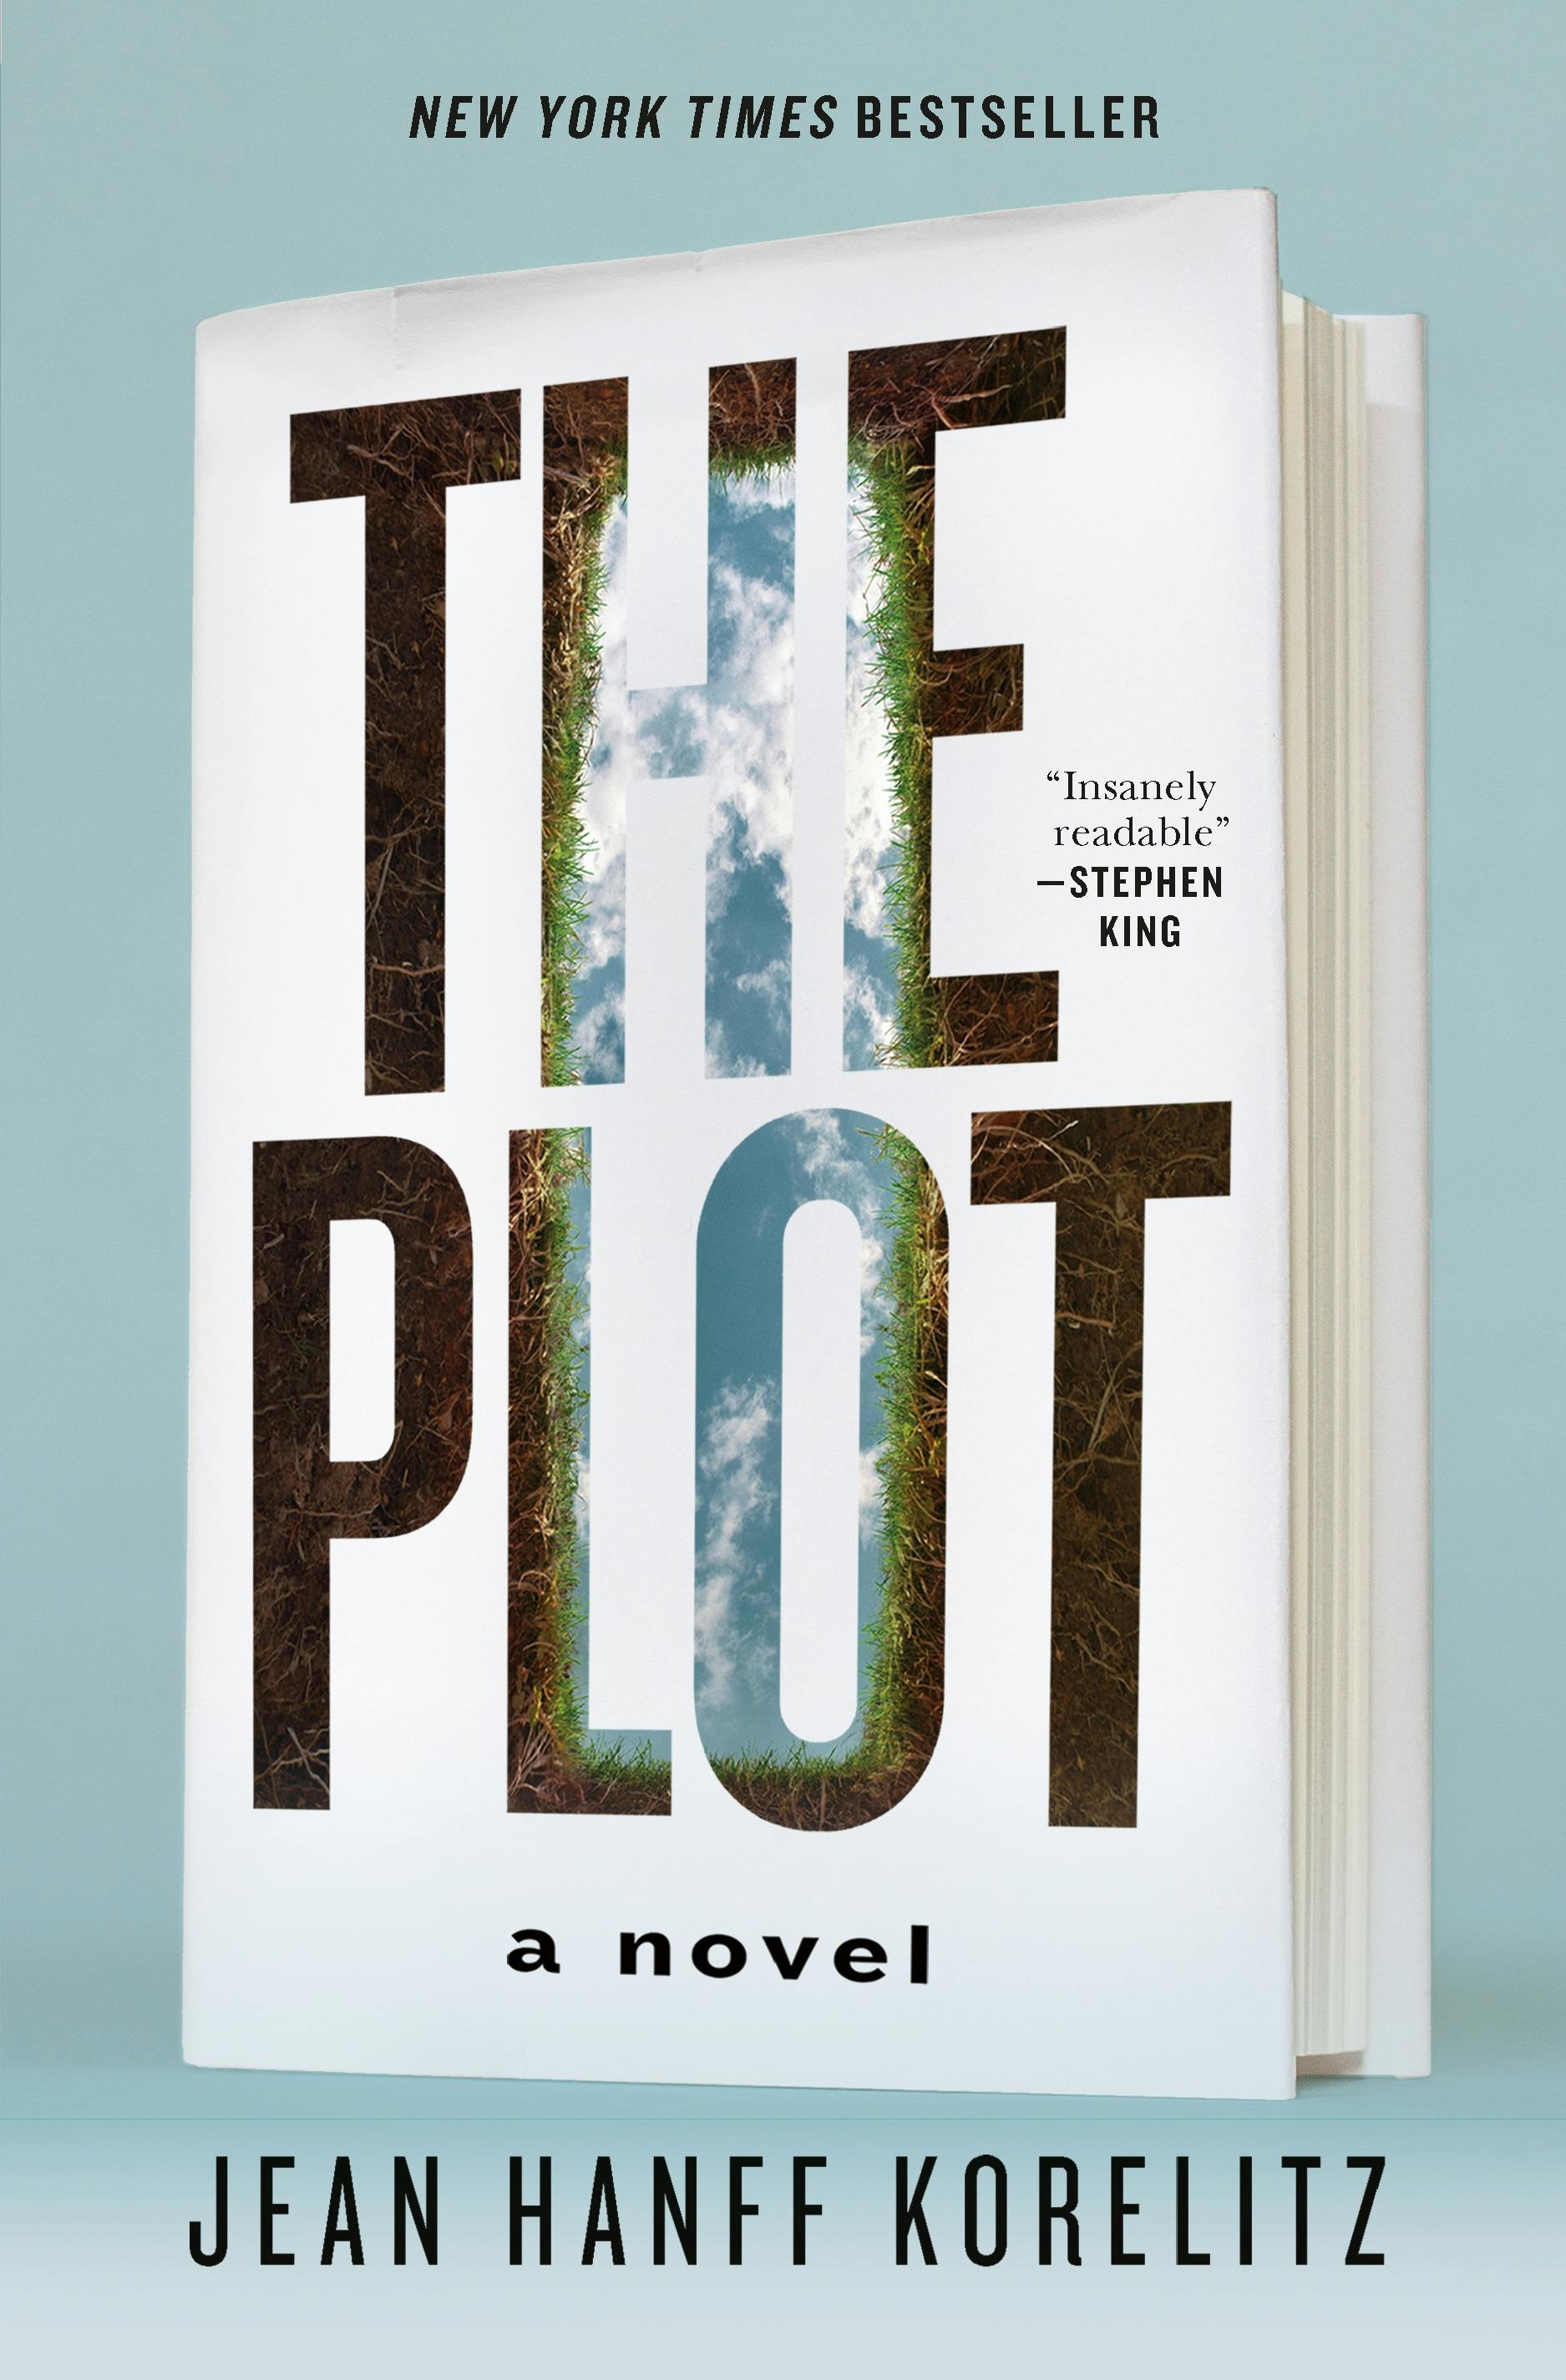 losing the plot book review